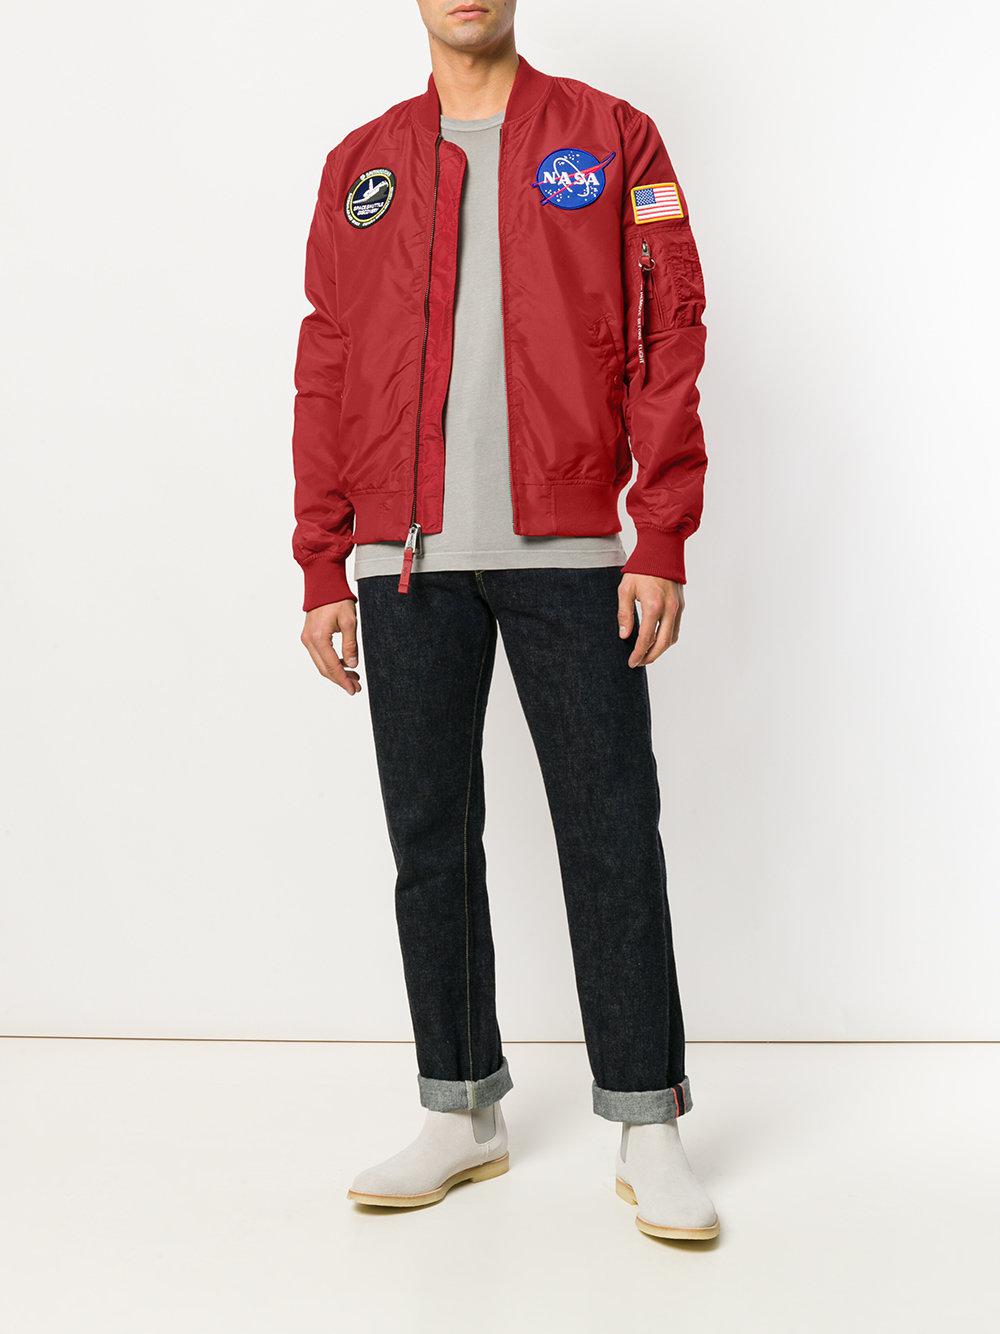 Alpha Industries Nasa Bomber Jacket in Red for Men - Lyst